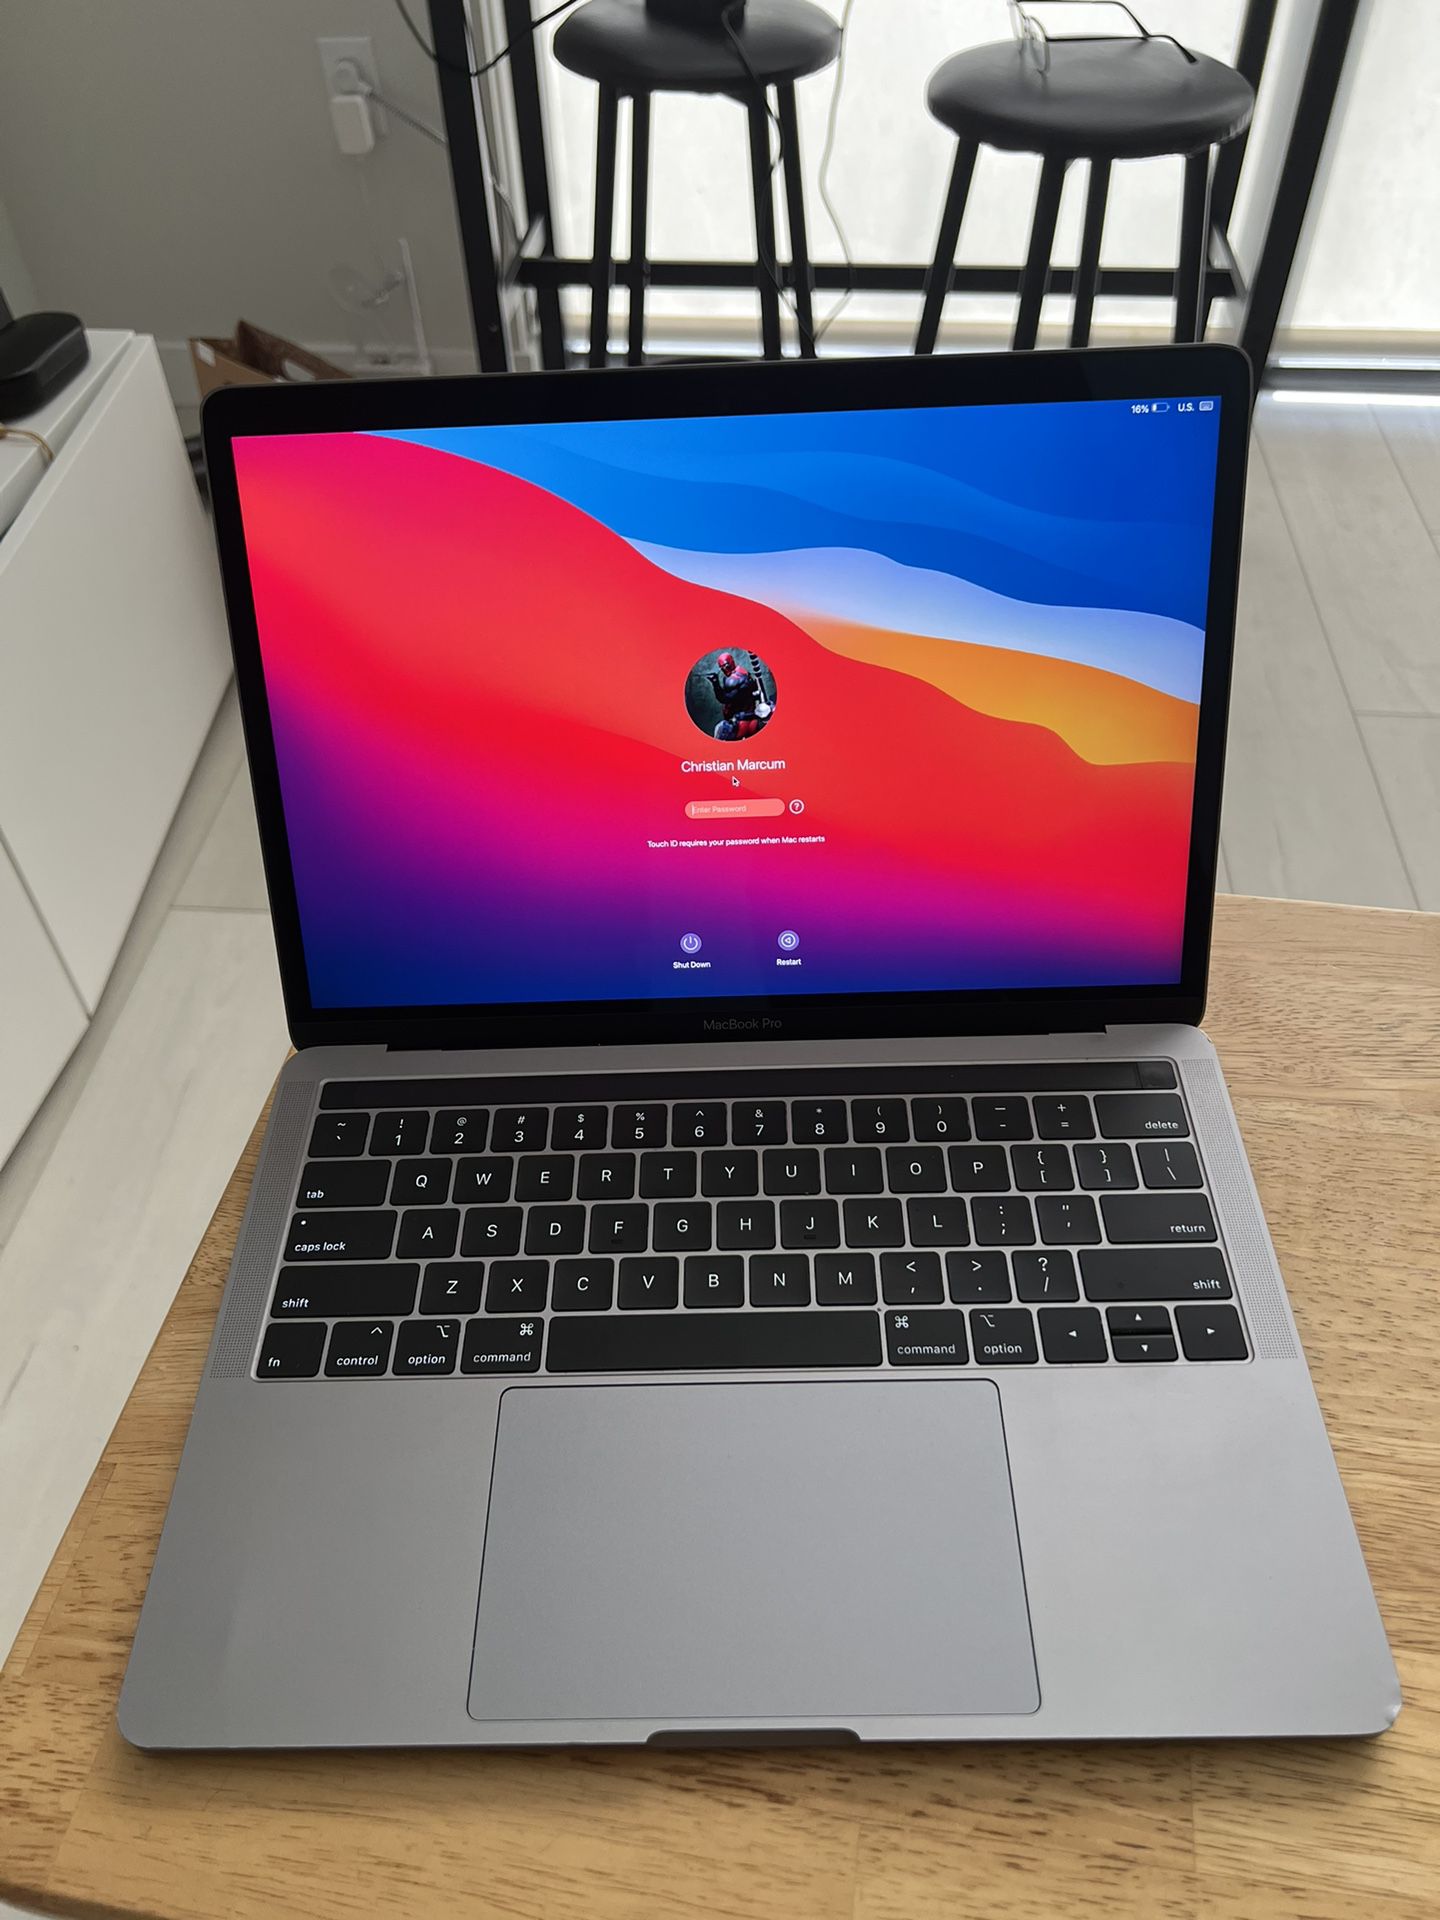 MacBook Pro 13 Inches with touch pad